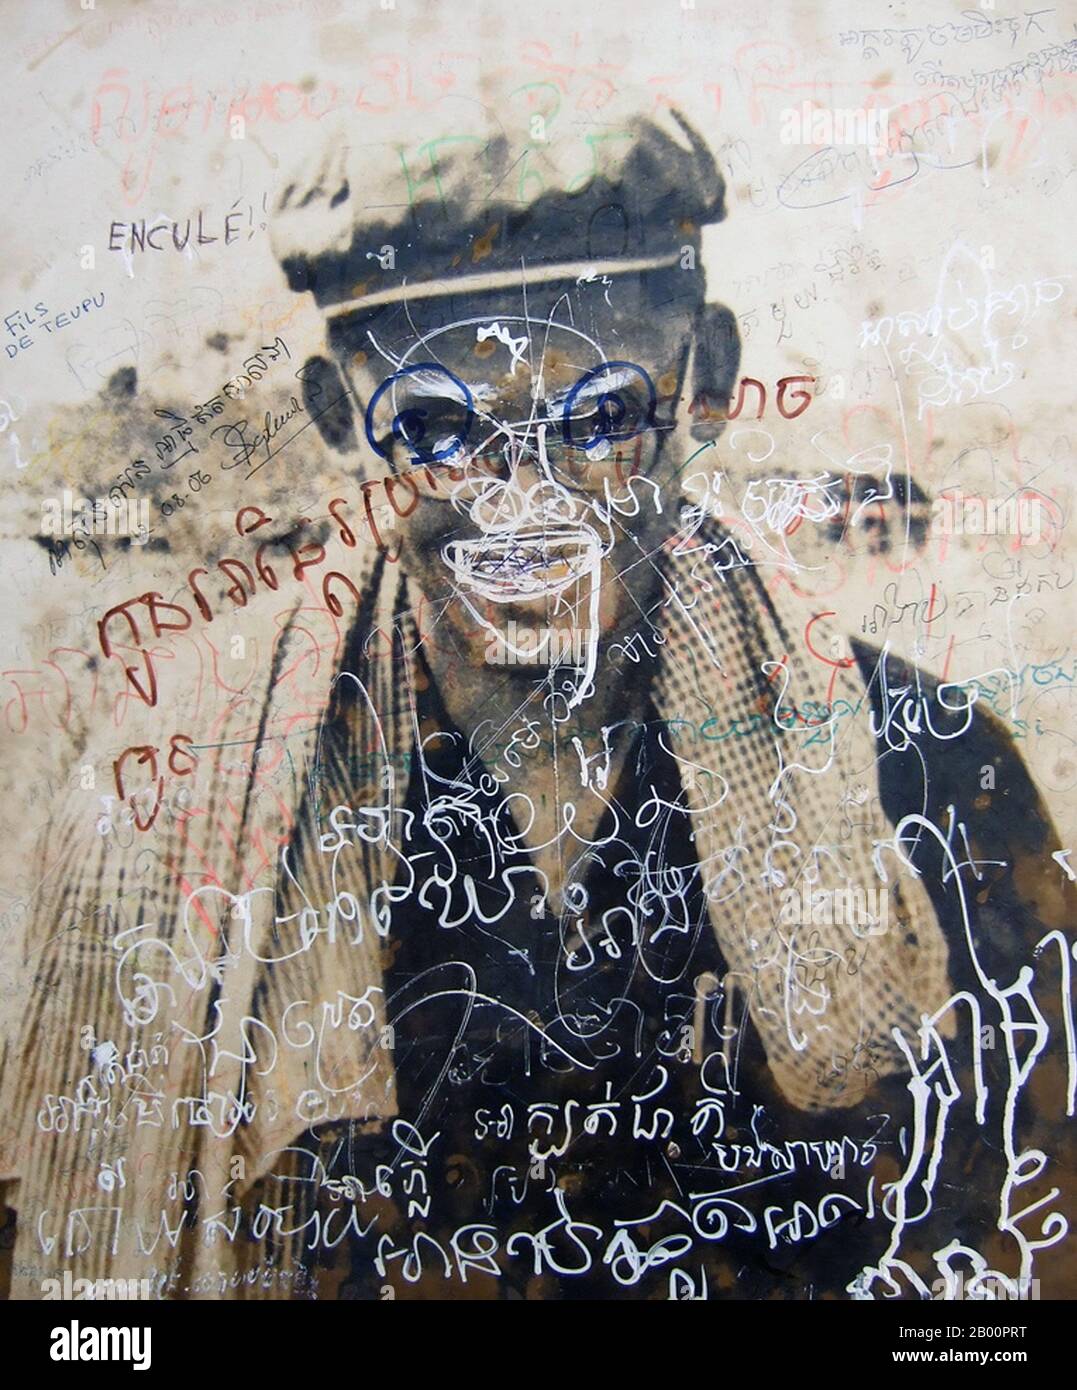 Cambodia: A photograph of Son Sen, Defense Minister of Democratic Kampuchea, defaced by Khmer graffiti.  Son Sen (June 12, 1930 – June 10, 1997), member of the Central Committee of the Communist Party of Kampuchea, aka the Khmer Rouge, from 1974 to 1992, Sen oversaw the Party's security apparatus, including the Santebal secret police and the notorious security prison S-21 at Tuol Sleng. Son Sen was married to Yun Yat, who became the Party's Minister of Education and Information. Along with the rest of his family, he was killed on the orders of Pol Pot during a 1997 factional split. Stock Photo